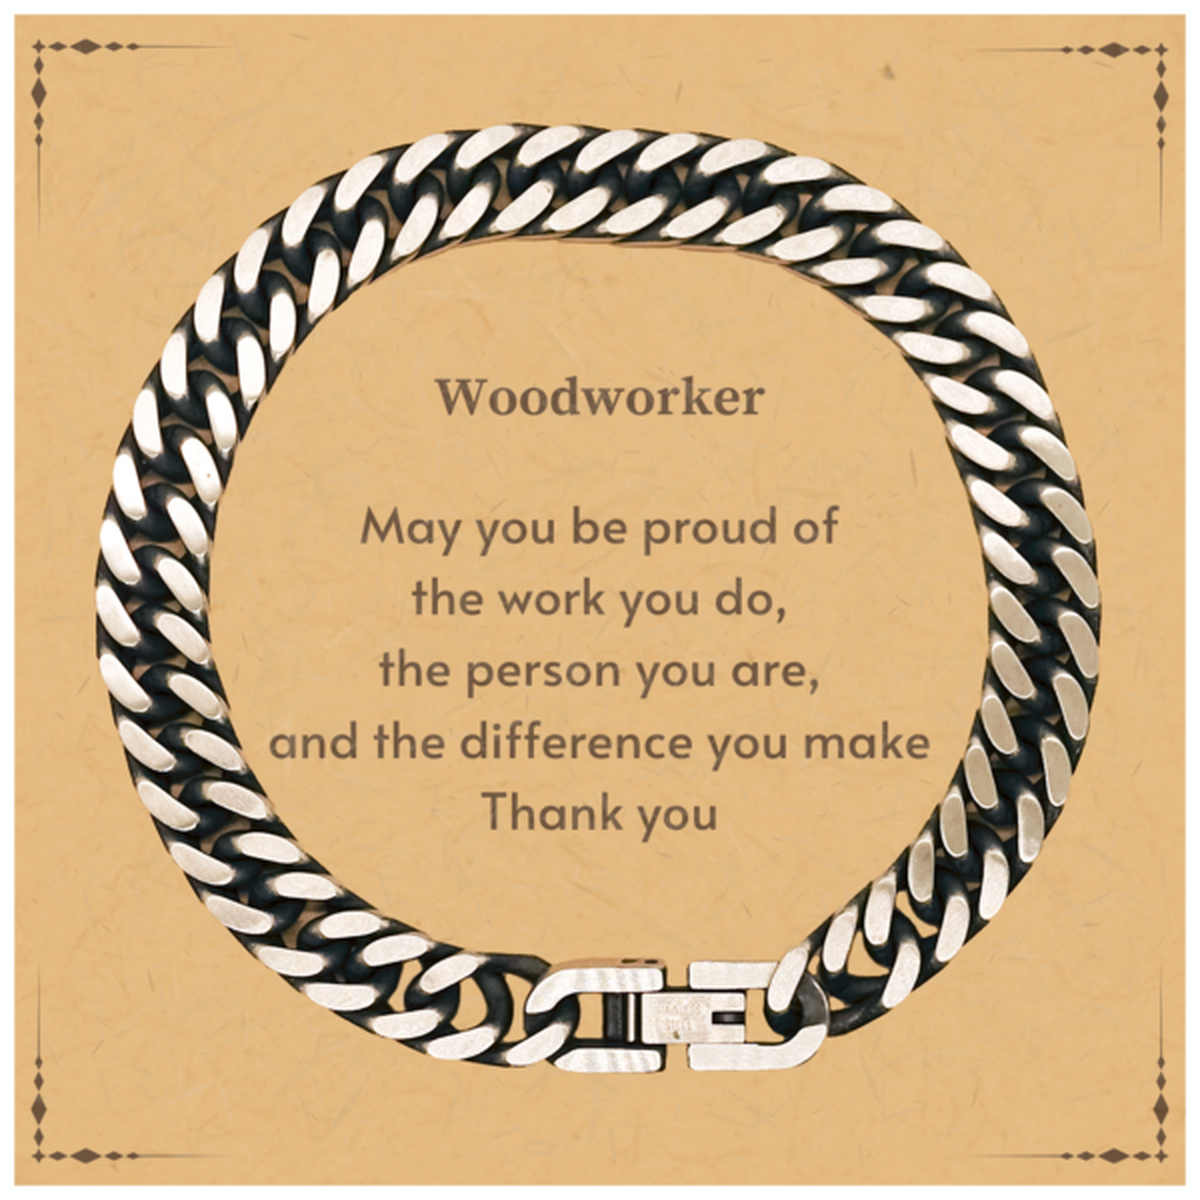 Heartwarming Cuban Link Chain Bracelet Retirement Coworkers Gifts for Woodworker, Woodworker May You be proud of the work you do, the person you are Gifts for Boss Men Women Friends